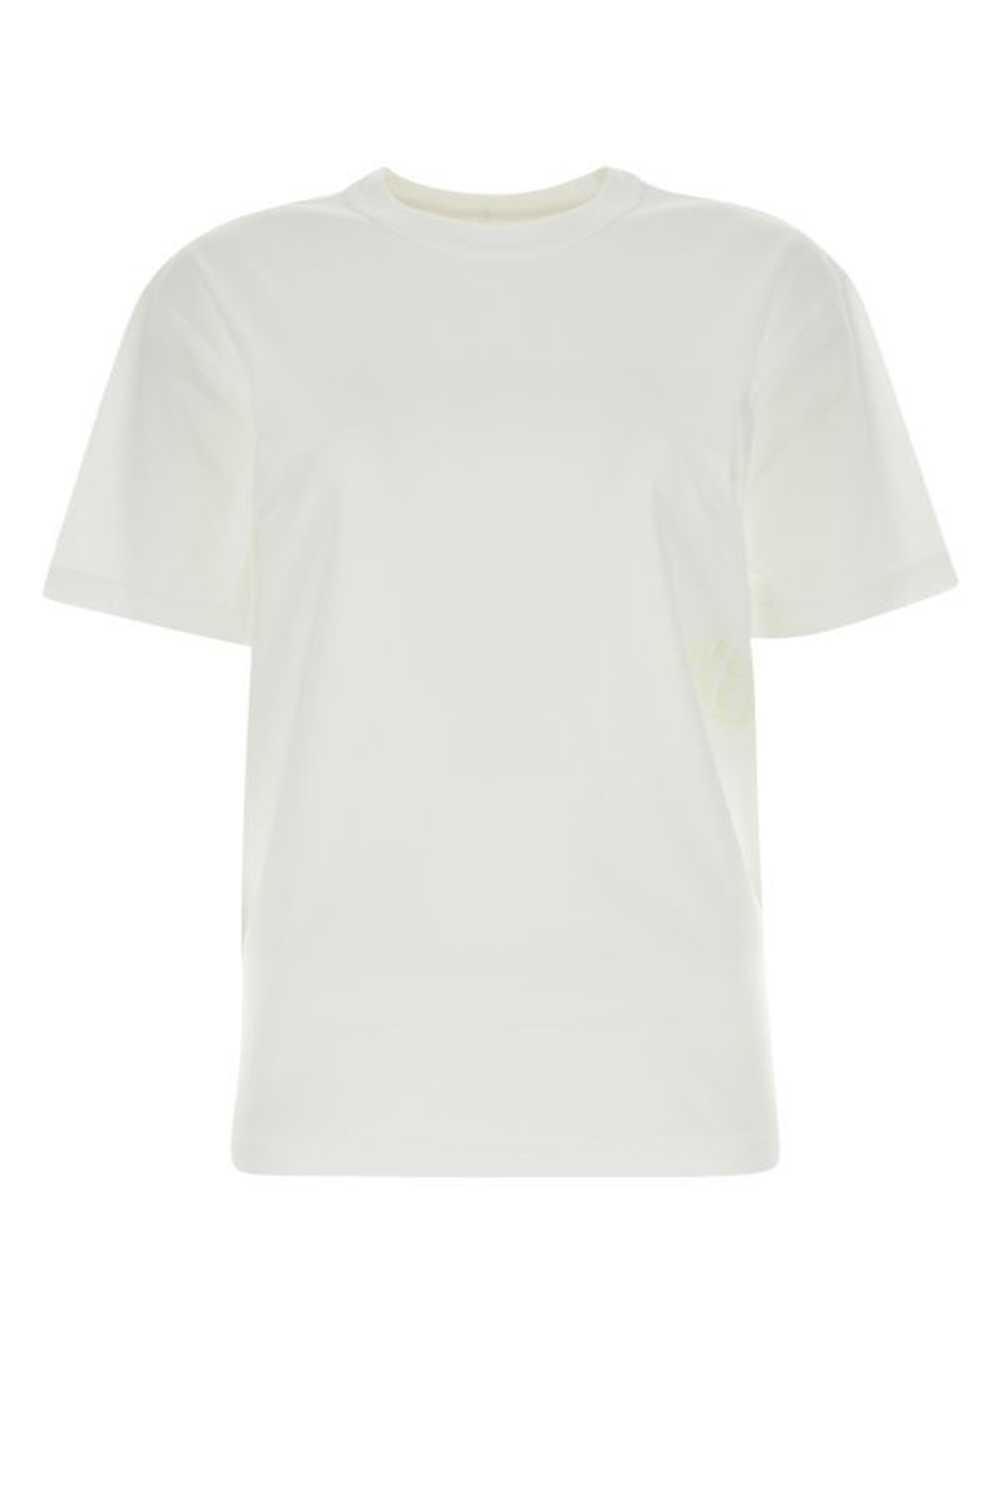 T by Alexander Wang White Cotton T-Shirt - image 3